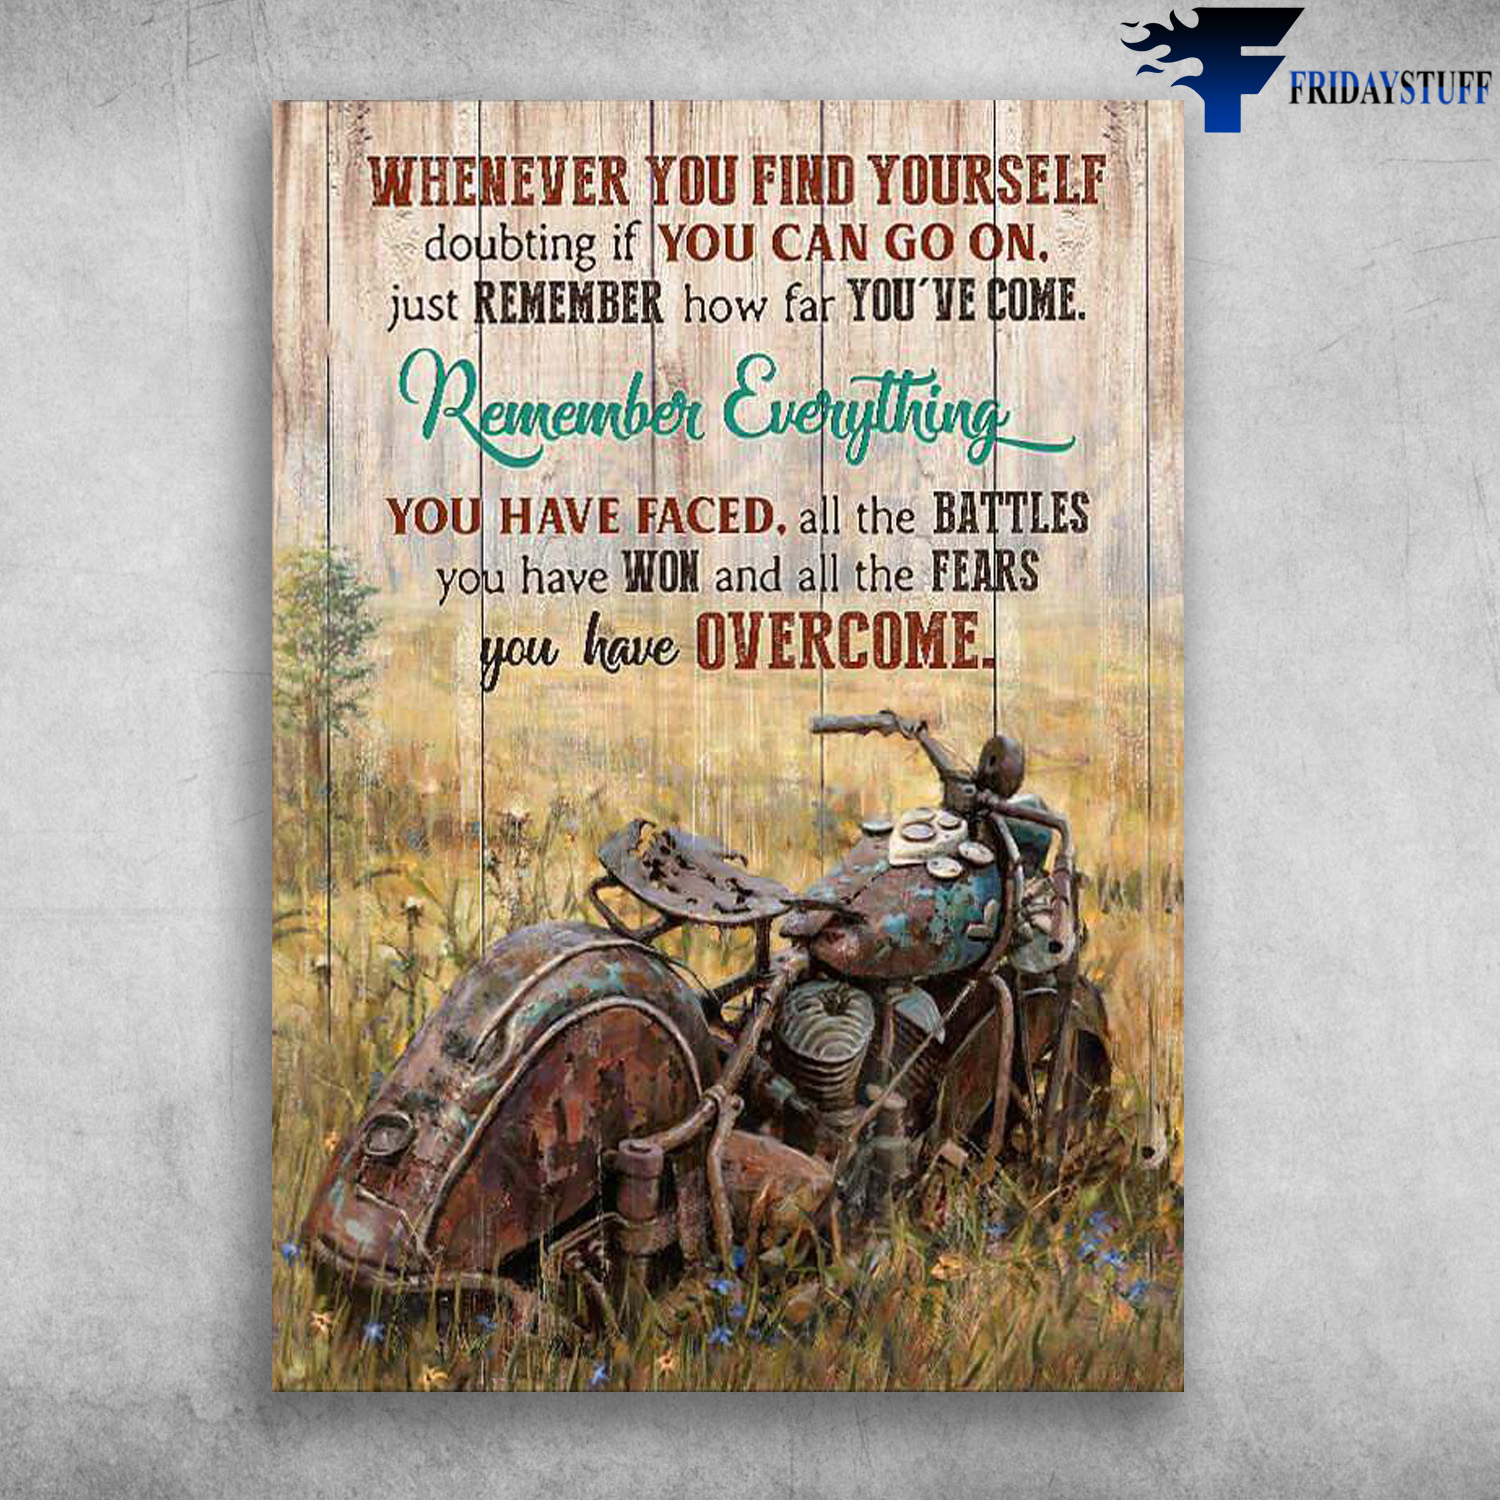 Old Motorcycle - Whever You FInd Yourself, Doubting If You Can Go On, Just Remember How Far You've Come, Remember Everything, You Have Faced, All The Battles, You Have Won And All The Fear, You Have Overcome